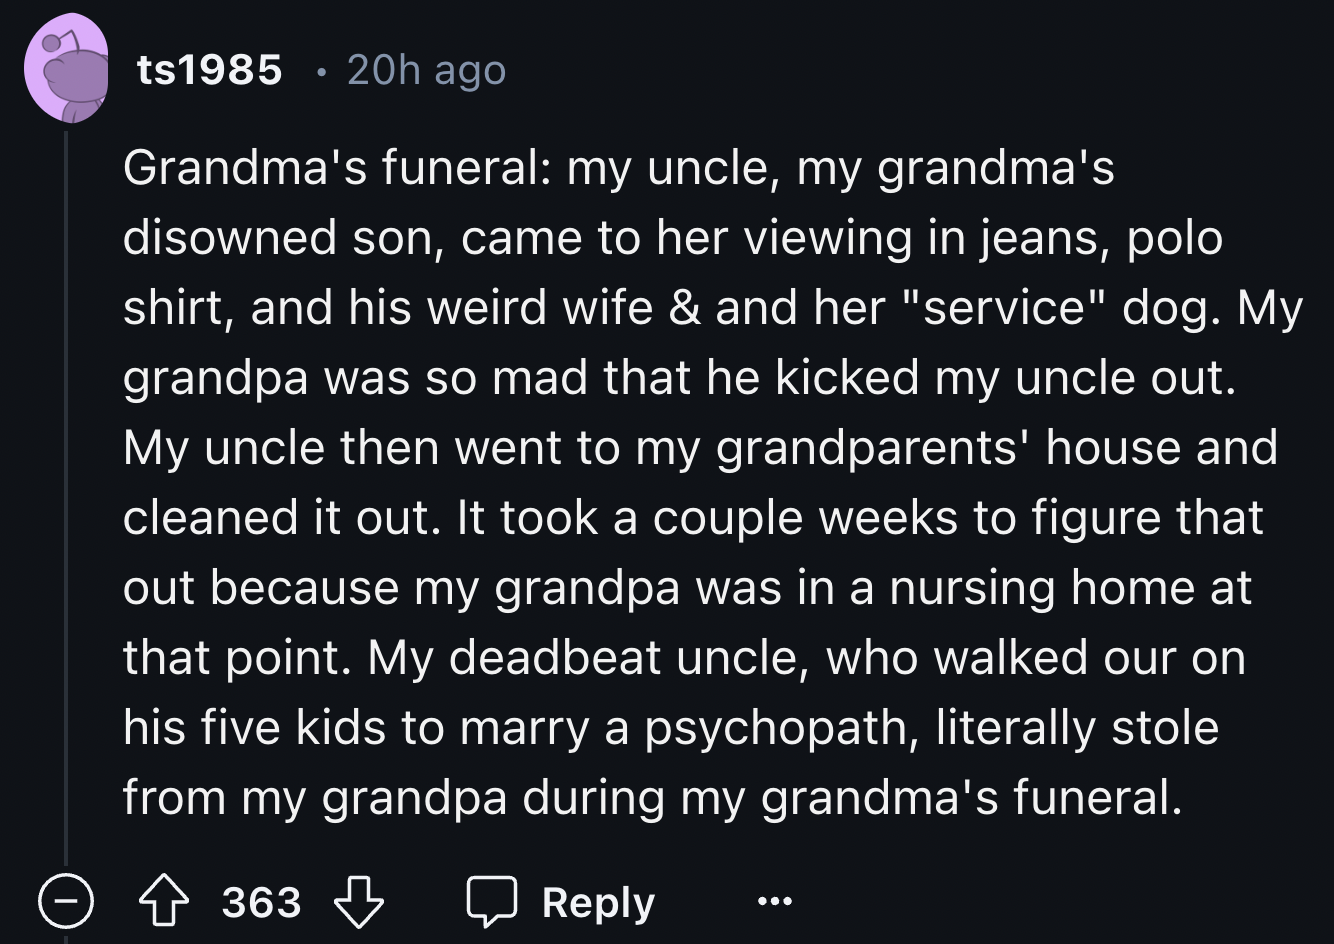 screenshot - ts1985 20h ago Grandma's funeral my uncle, my grandma's disowned son, came to her viewing in jeans, polo shirt, and his weird wife & and her "service" dog. My grandpa was so mad that he kicked my uncle out. My uncle then went to my grandparen